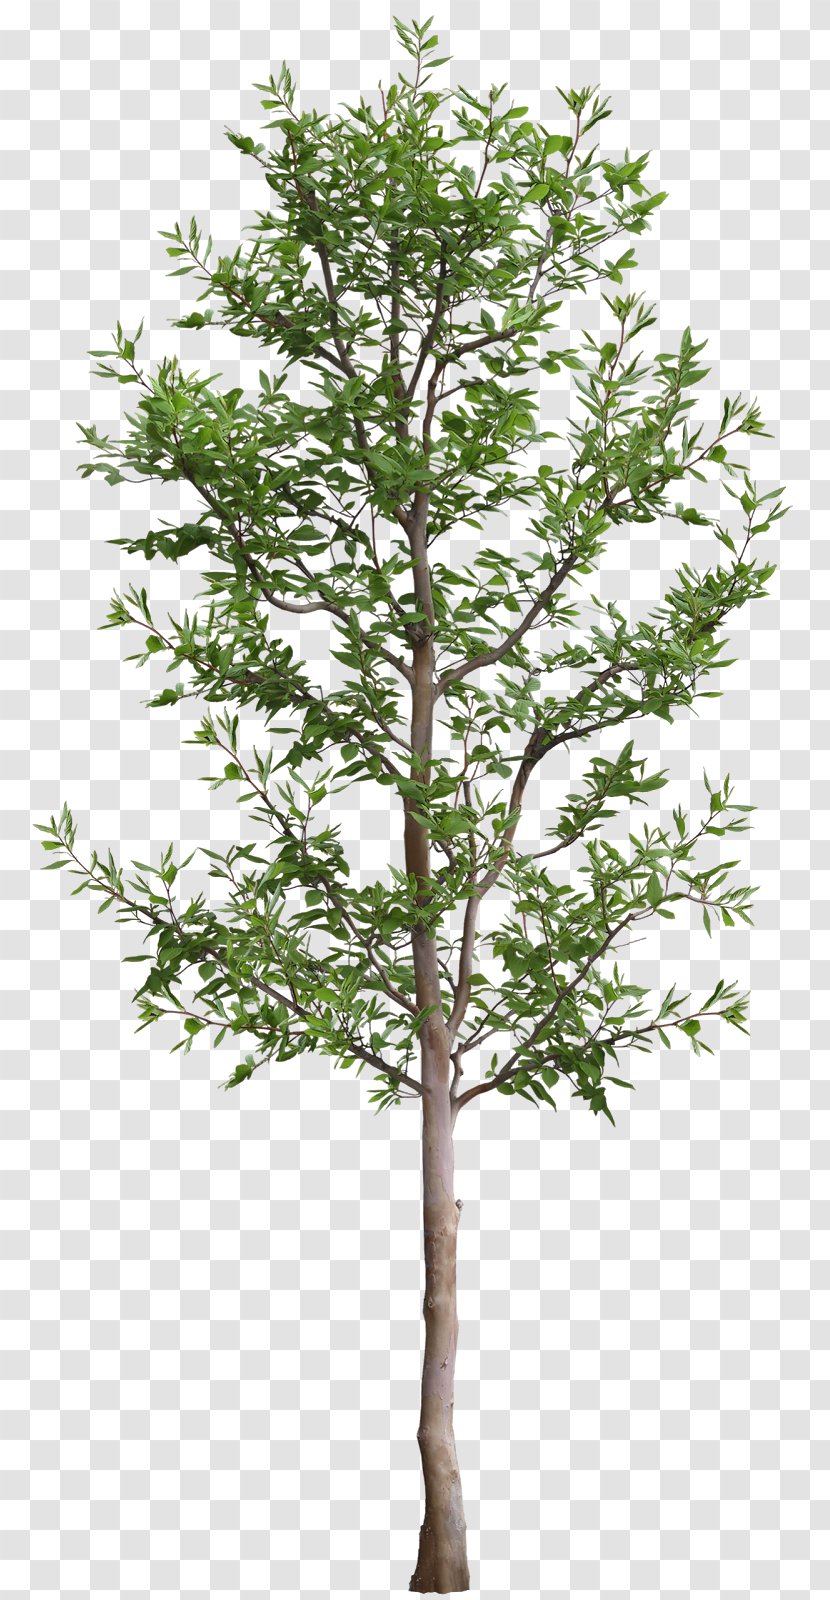 Tree .dwg Autodesk 3ds Max Rendering - Texture Mapping - Top View Transparent PNG